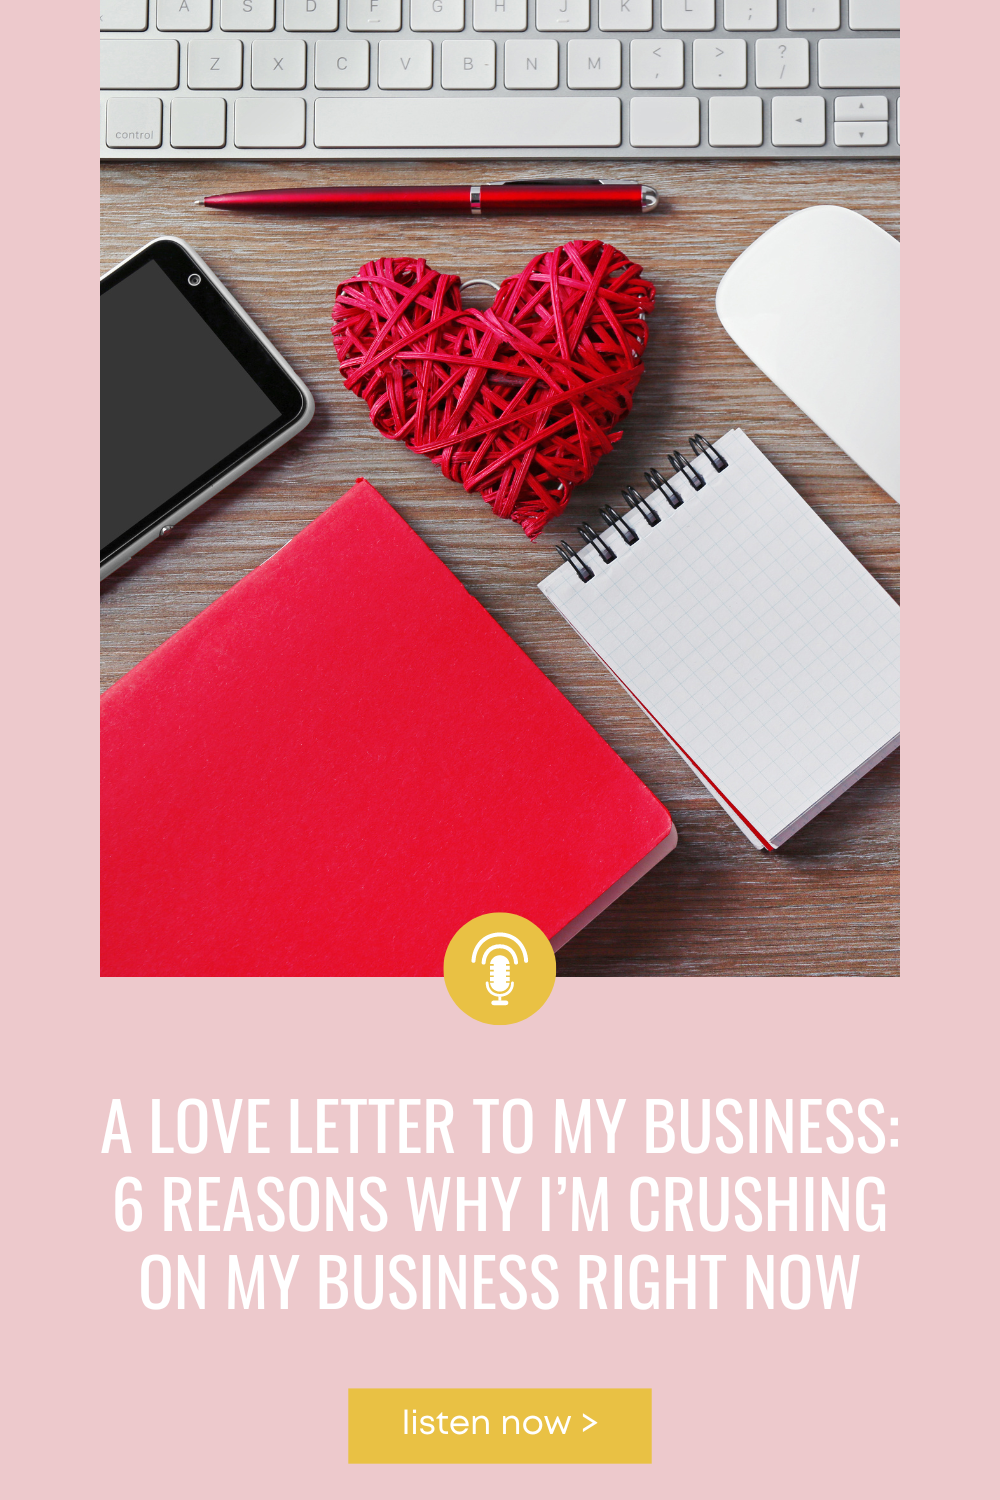 Heart and red notebook desk with the title A Love Letter To My Business: 6 Reasons Why I’m Crushing On My Business Right Now below